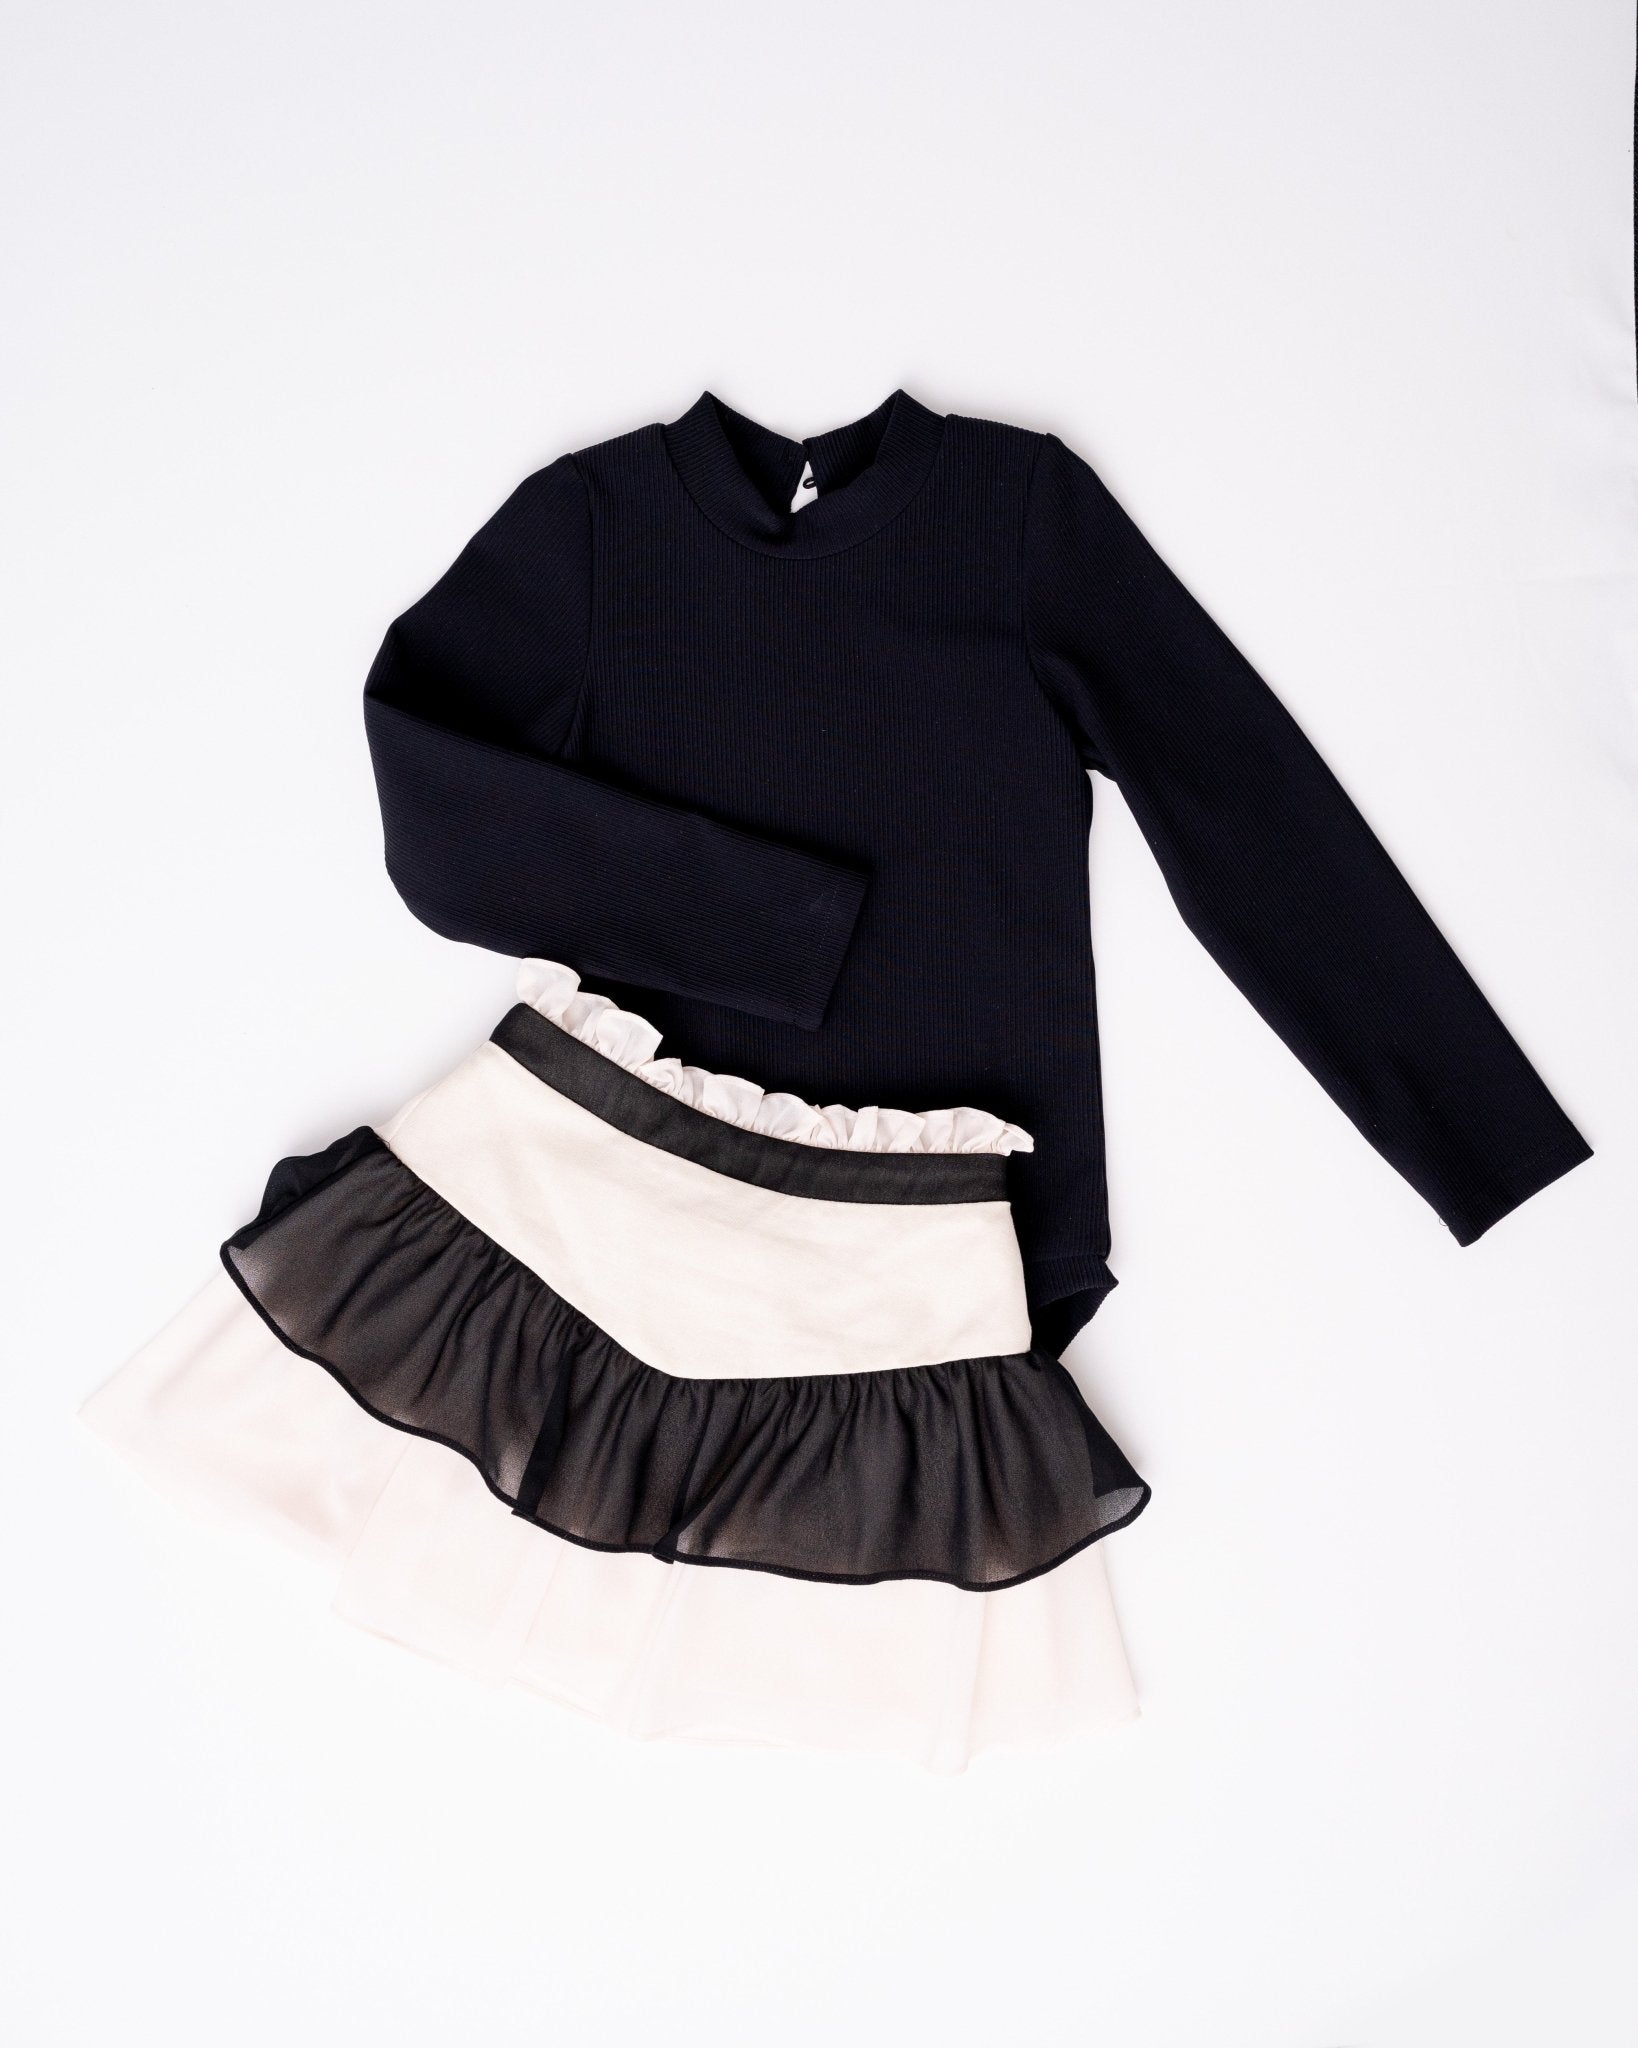 Sweet Melody Black and Ivory Bodysuit/Leo and Skirt Simplicity Set - Evie's Closet Clothing